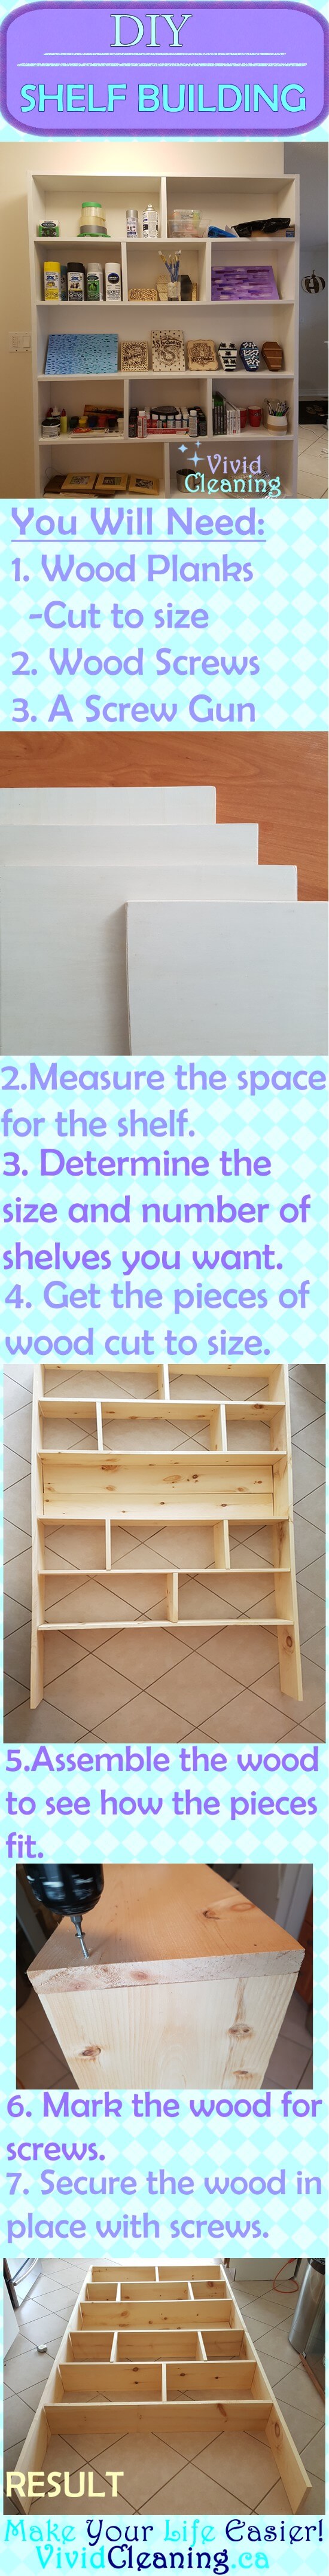 You Will Need: Wood Planks -Cut to size Wood Screws A Screw Gun (Electric Drill) Measure the space for the shelf. Determine the size and number of shelves you want. Get the pieces of wood cut to size. Assemble the wood to see how the pieces fit. Mark the wood for screws. Secure the wood in place with screws.